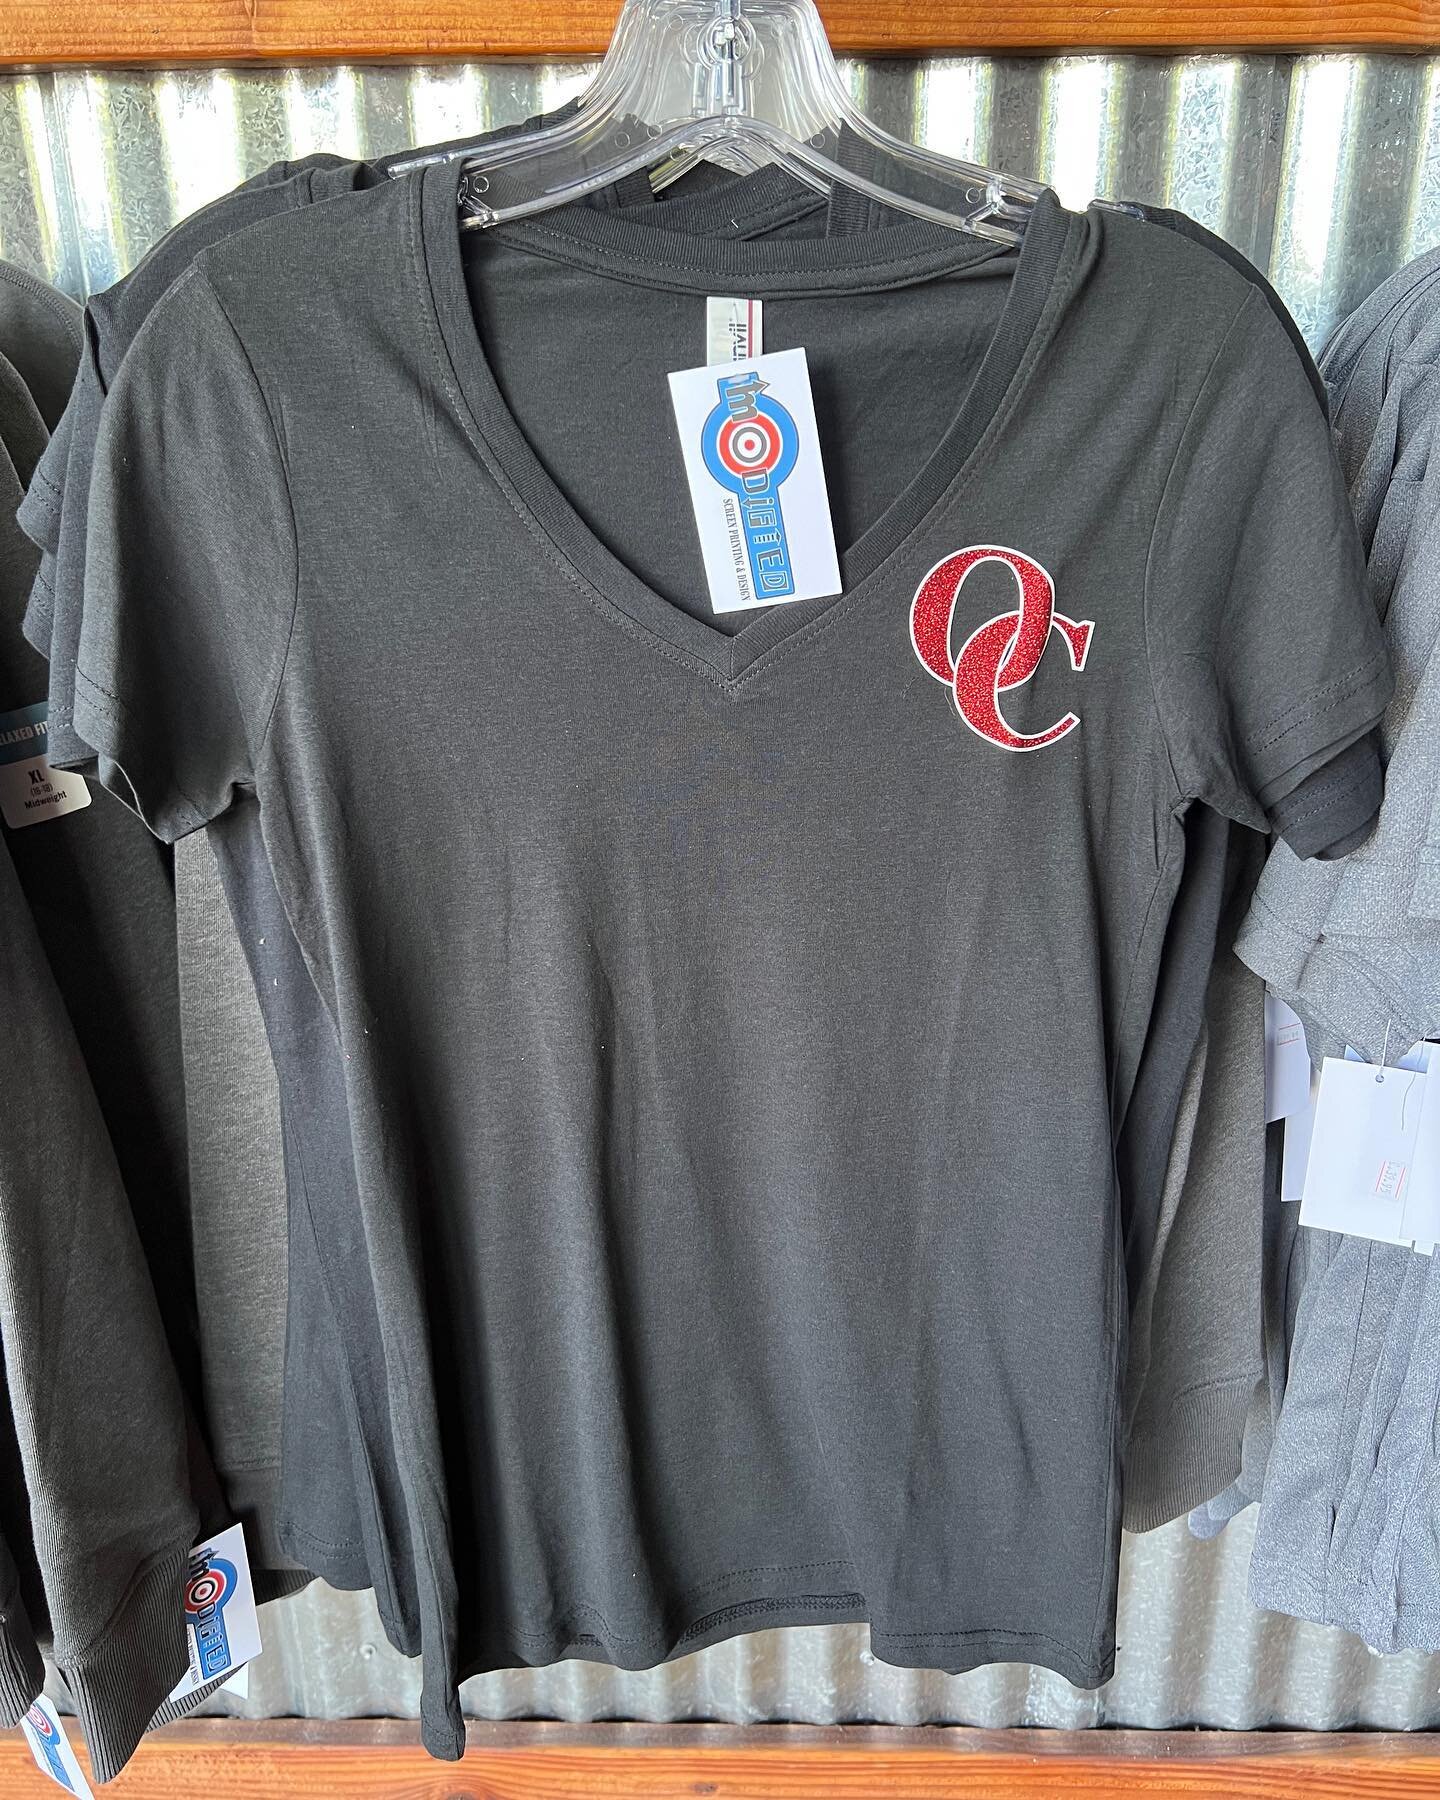 New in stock! 

OC Glitter V neck tee - Sizes XS - L! Only $25 and the perfect basic for spring. Come get one today!